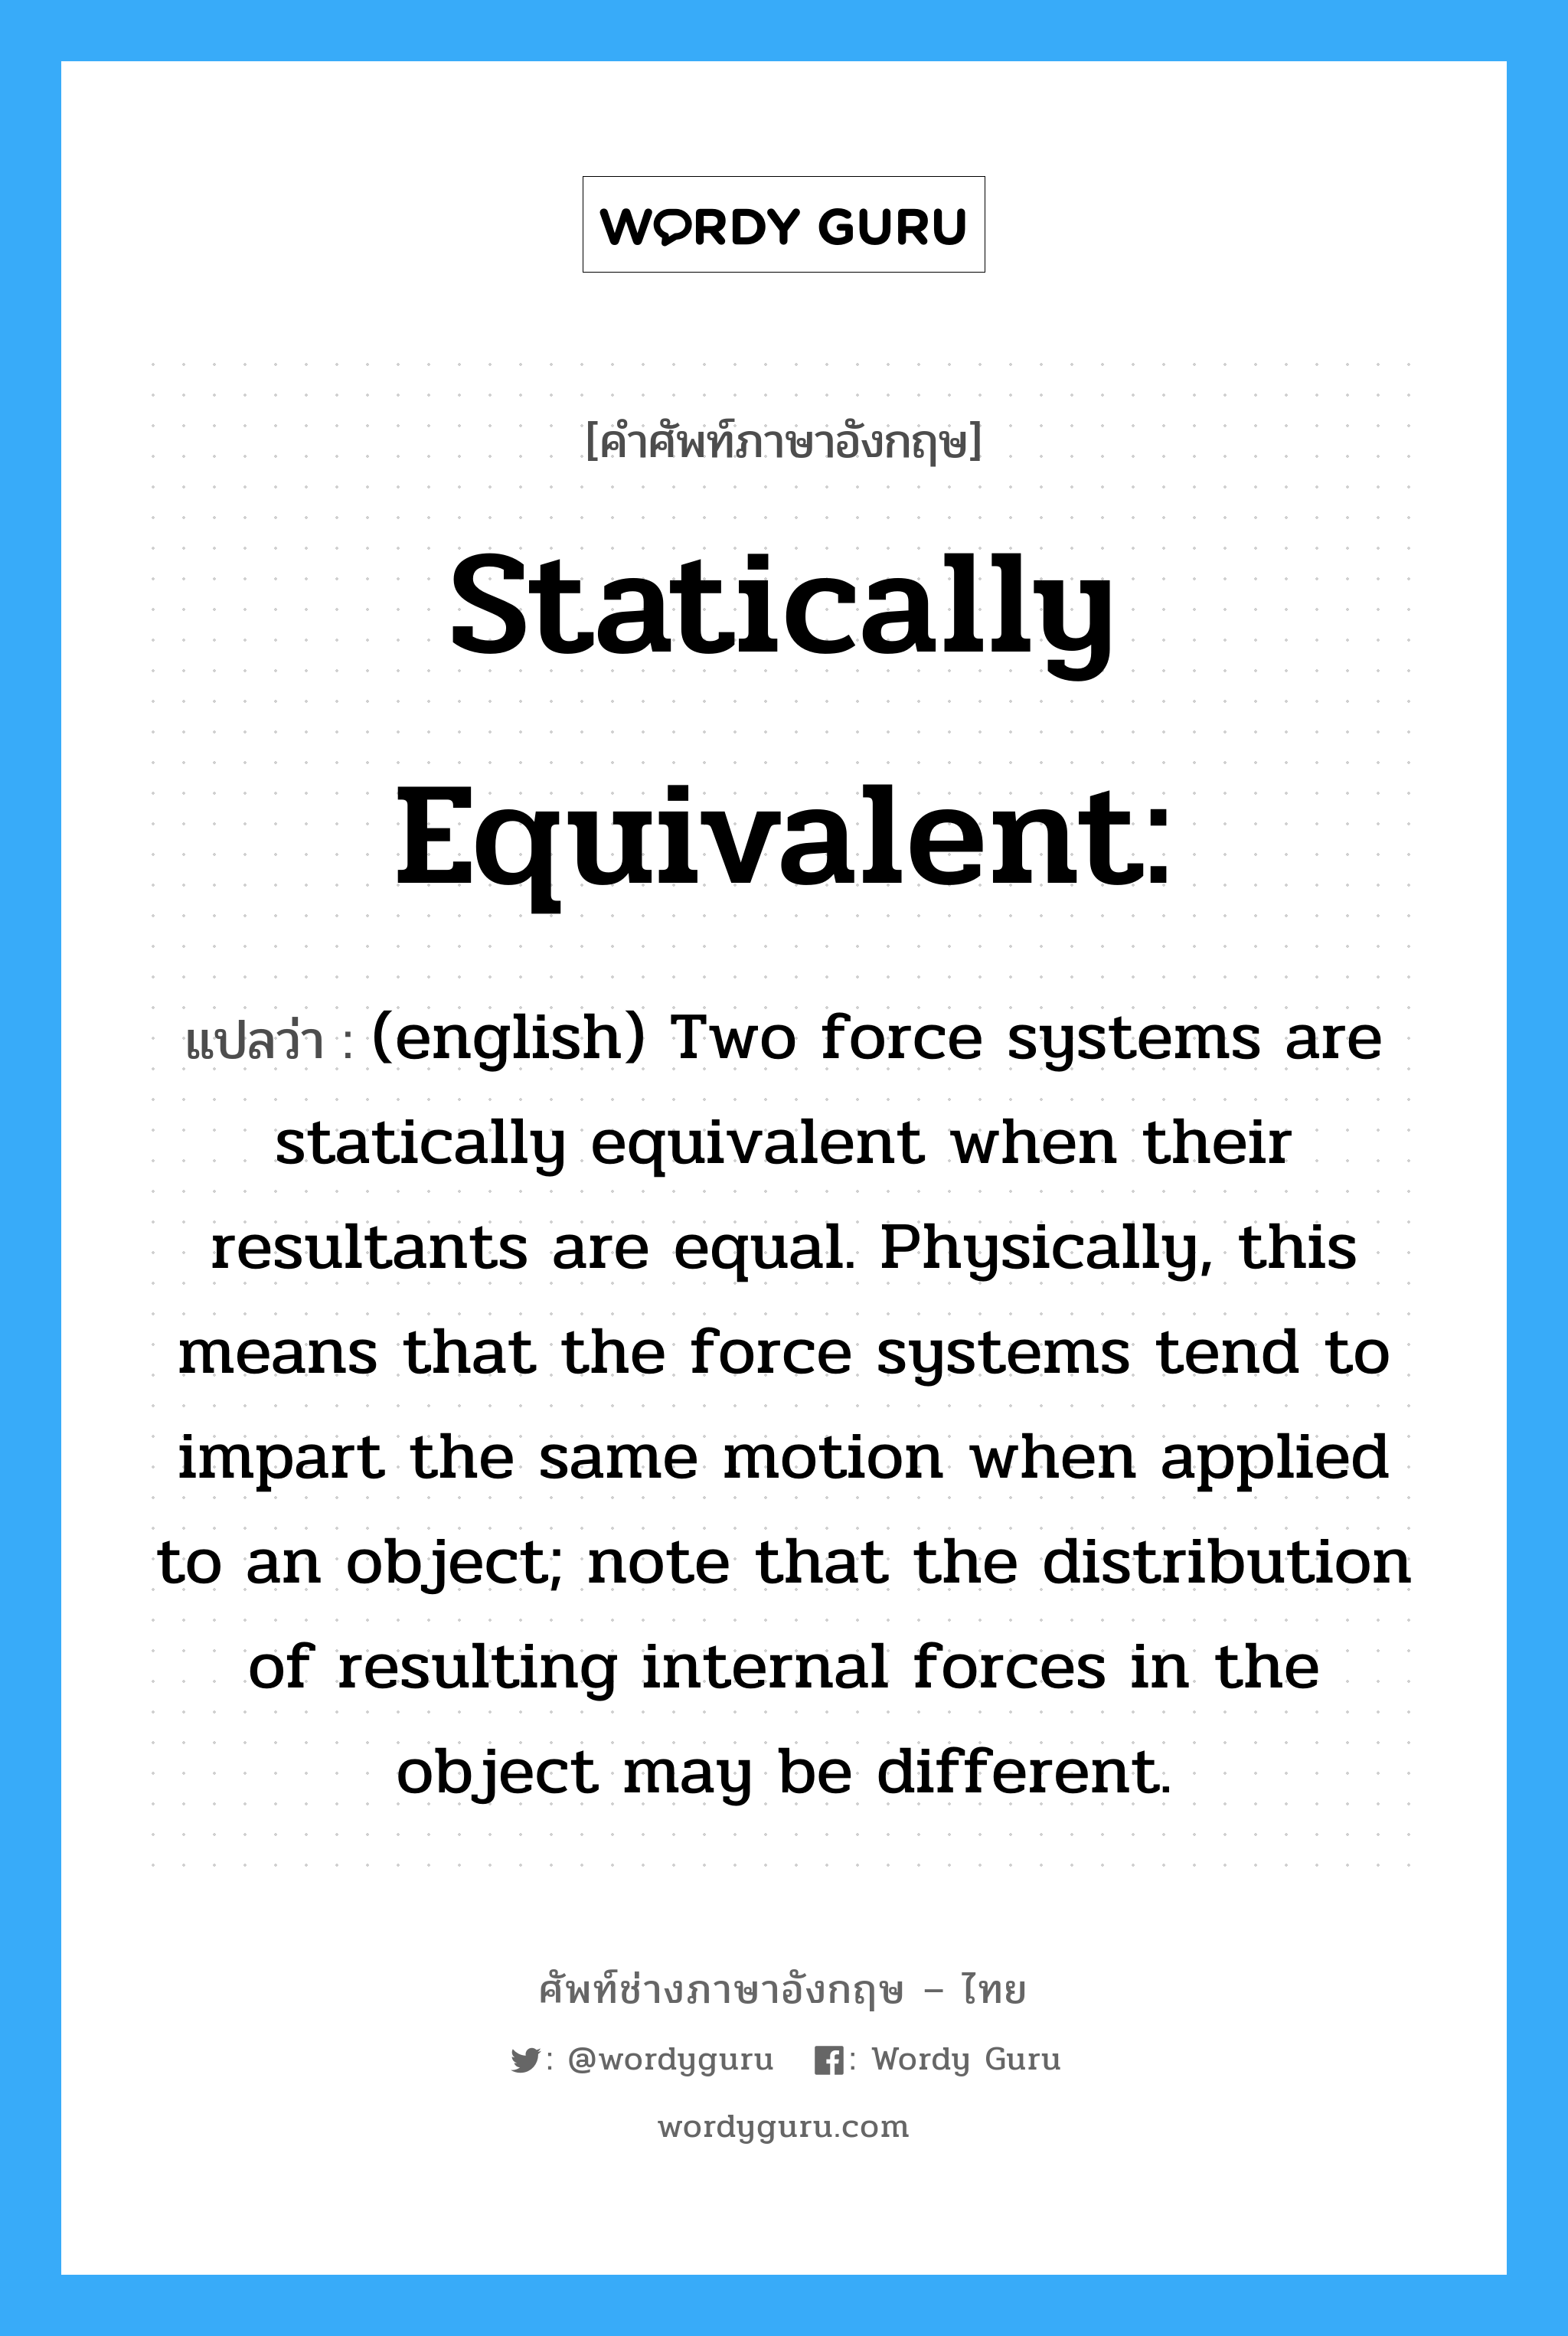 (english) Two force systems are statically equivalent when their resultants are equal. Physically, this means that the force systems tend to impart the same motion when applied to an object; note that the distribution of resulting internal forces in the object may be different. ภาษาอังกฤษ?, คำศัพท์ช่างภาษาอังกฤษ - ไทย (english) Two force systems are statically equivalent when their resultants are equal. Physically, this means that the force systems tend to impart the same motion when applied to an object; note that the distribution of resulting internal forces in the object may be different. คำศัพท์ภาษาอังกฤษ (english) Two force systems are statically equivalent when their resultants are equal. Physically, this means that the force systems tend to impart the same motion when applied to an object; note that the distribution of resulting internal forces in the object may be different. แปลว่า Statically equivalent: